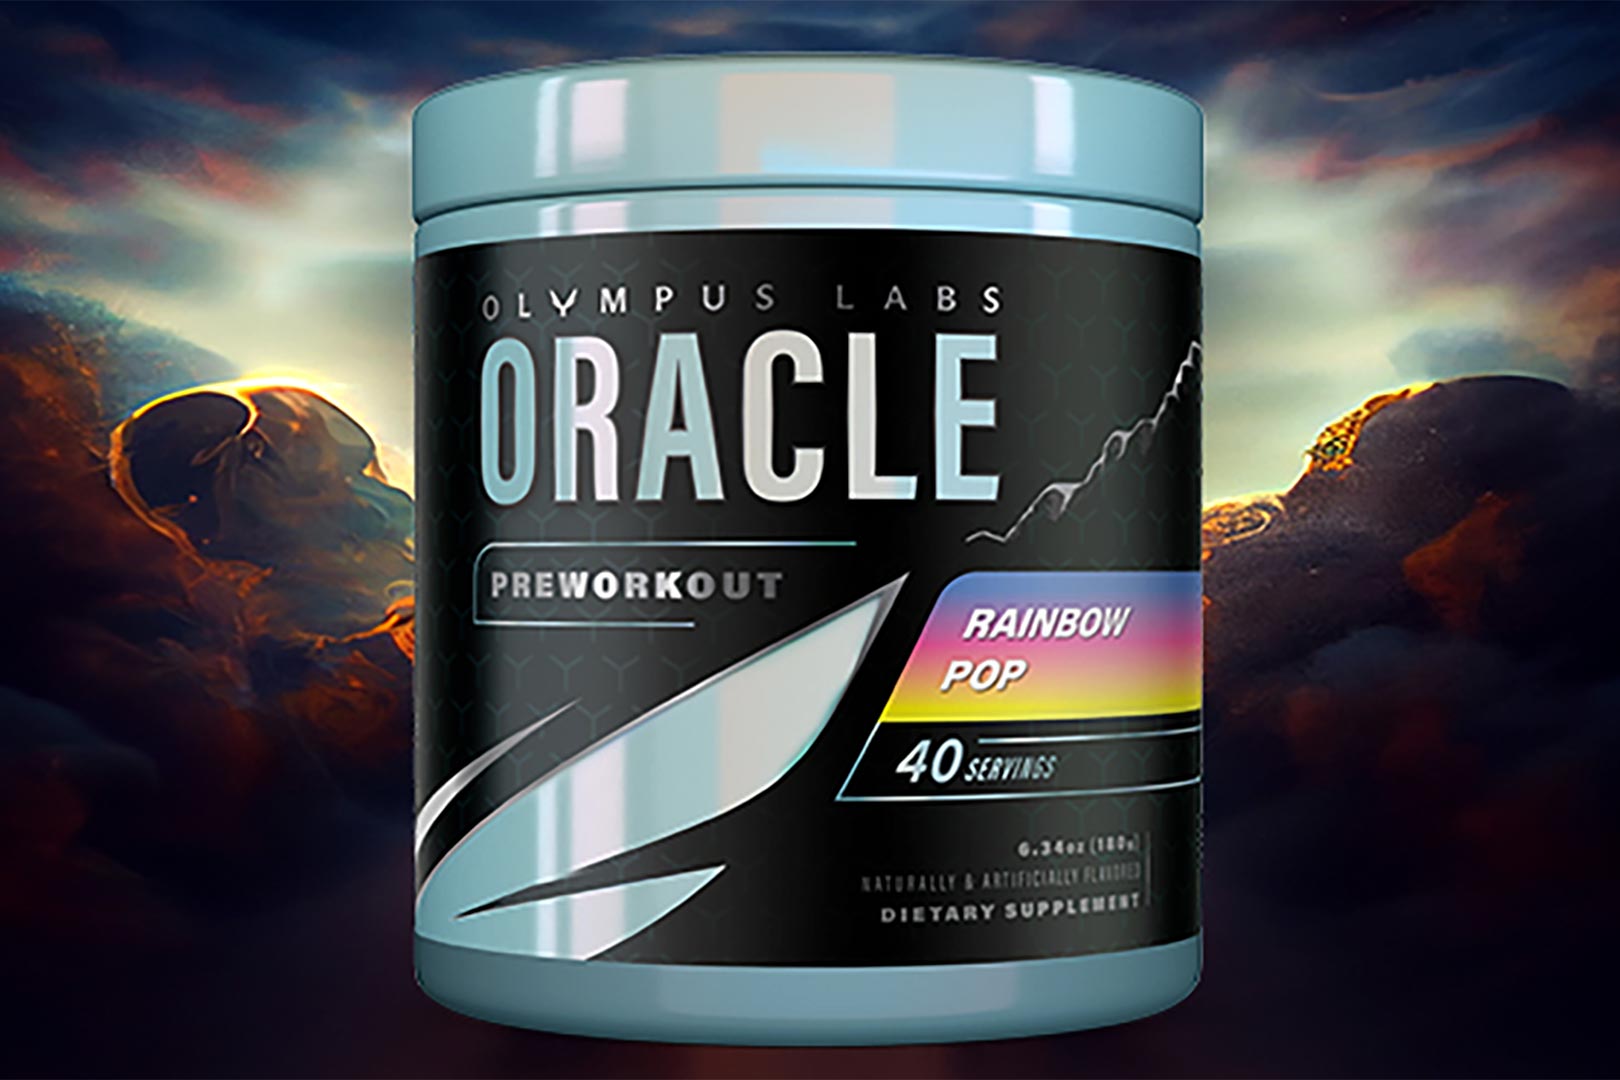 Olympus Labs Previews Its Oracle Pre Workout